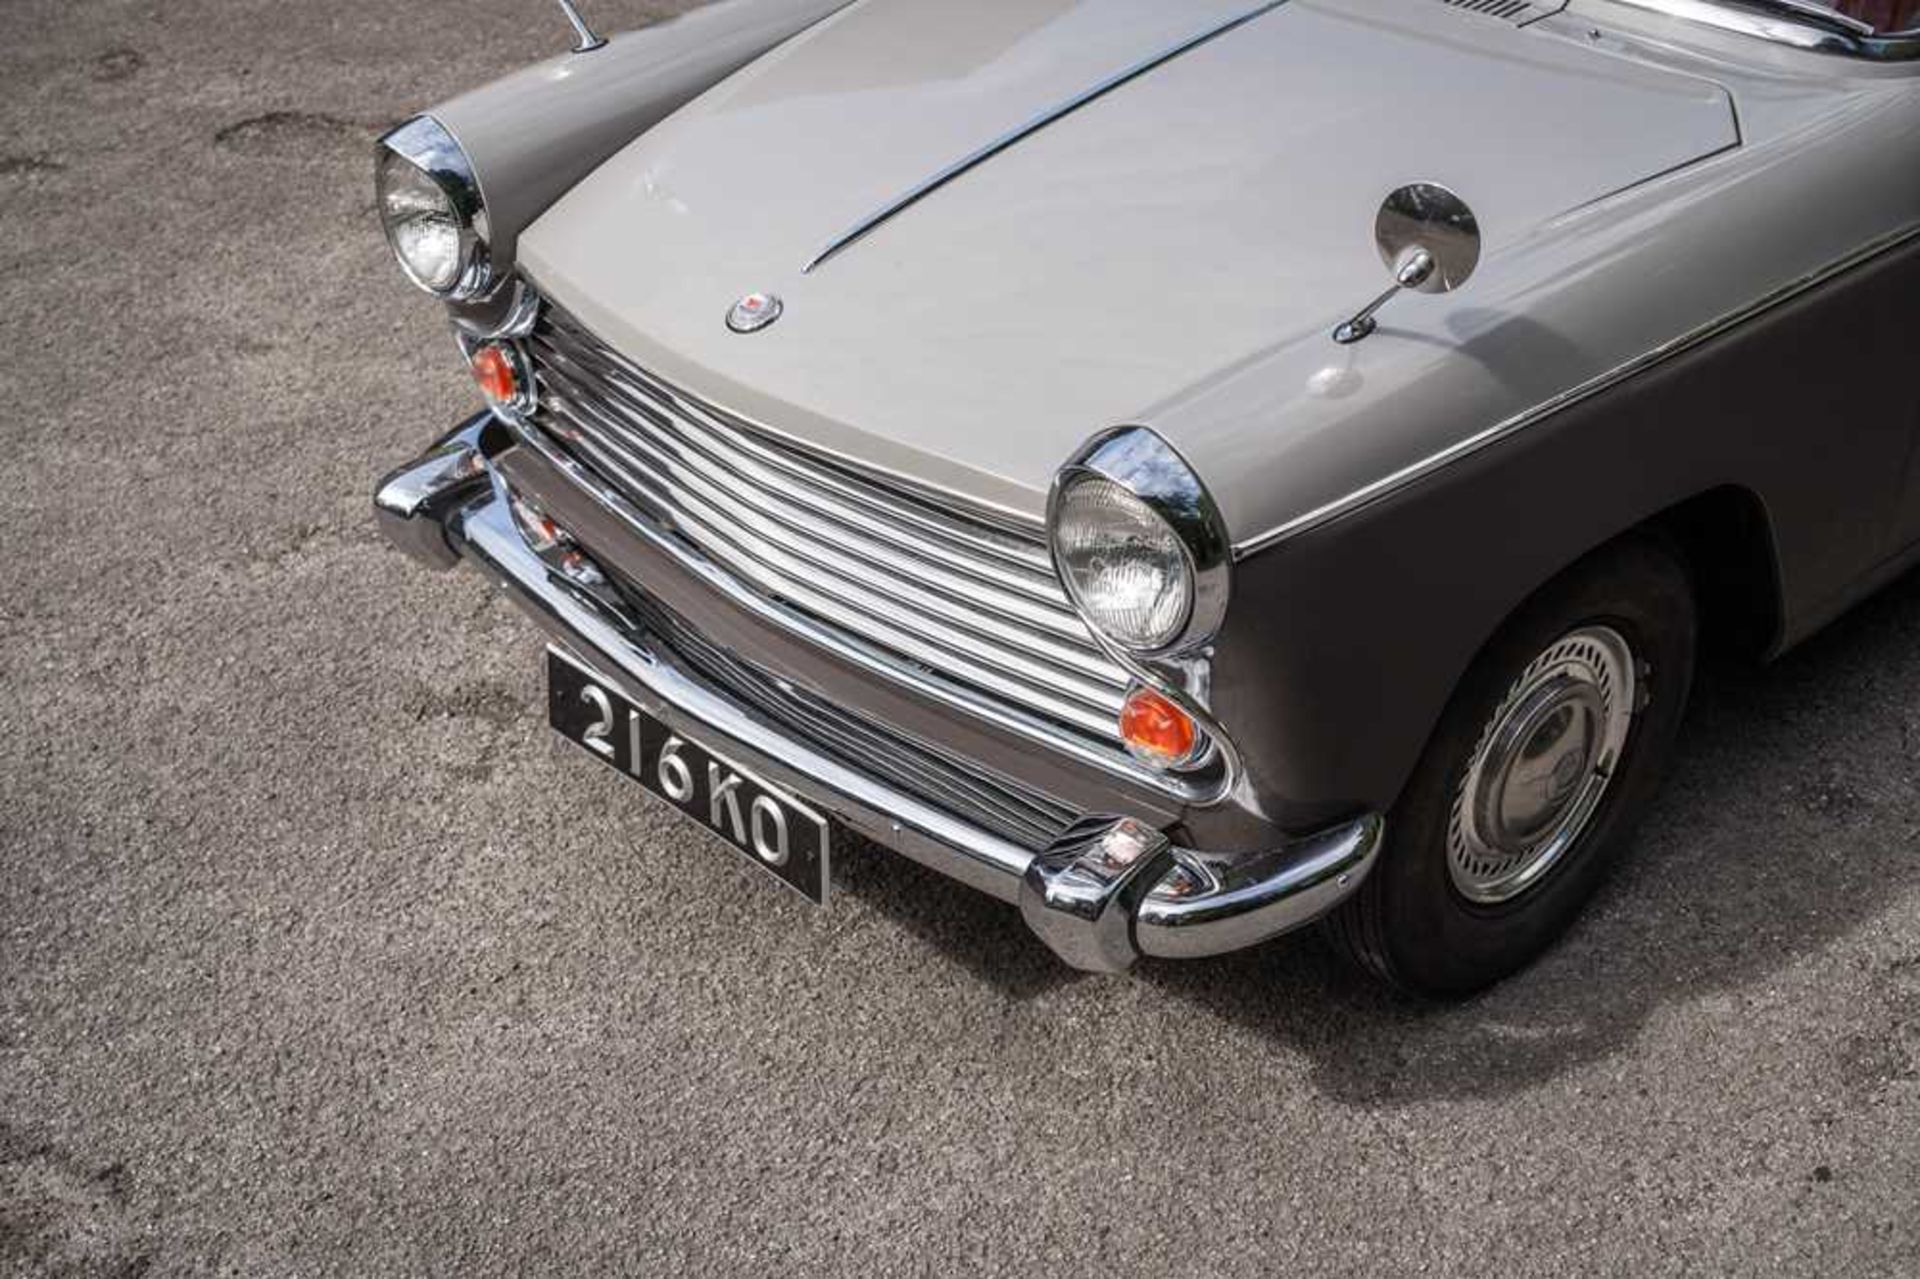 1964 Morris Oxford Series VI Farina Traveller Just 7,000 miles from new - Image 17 of 98